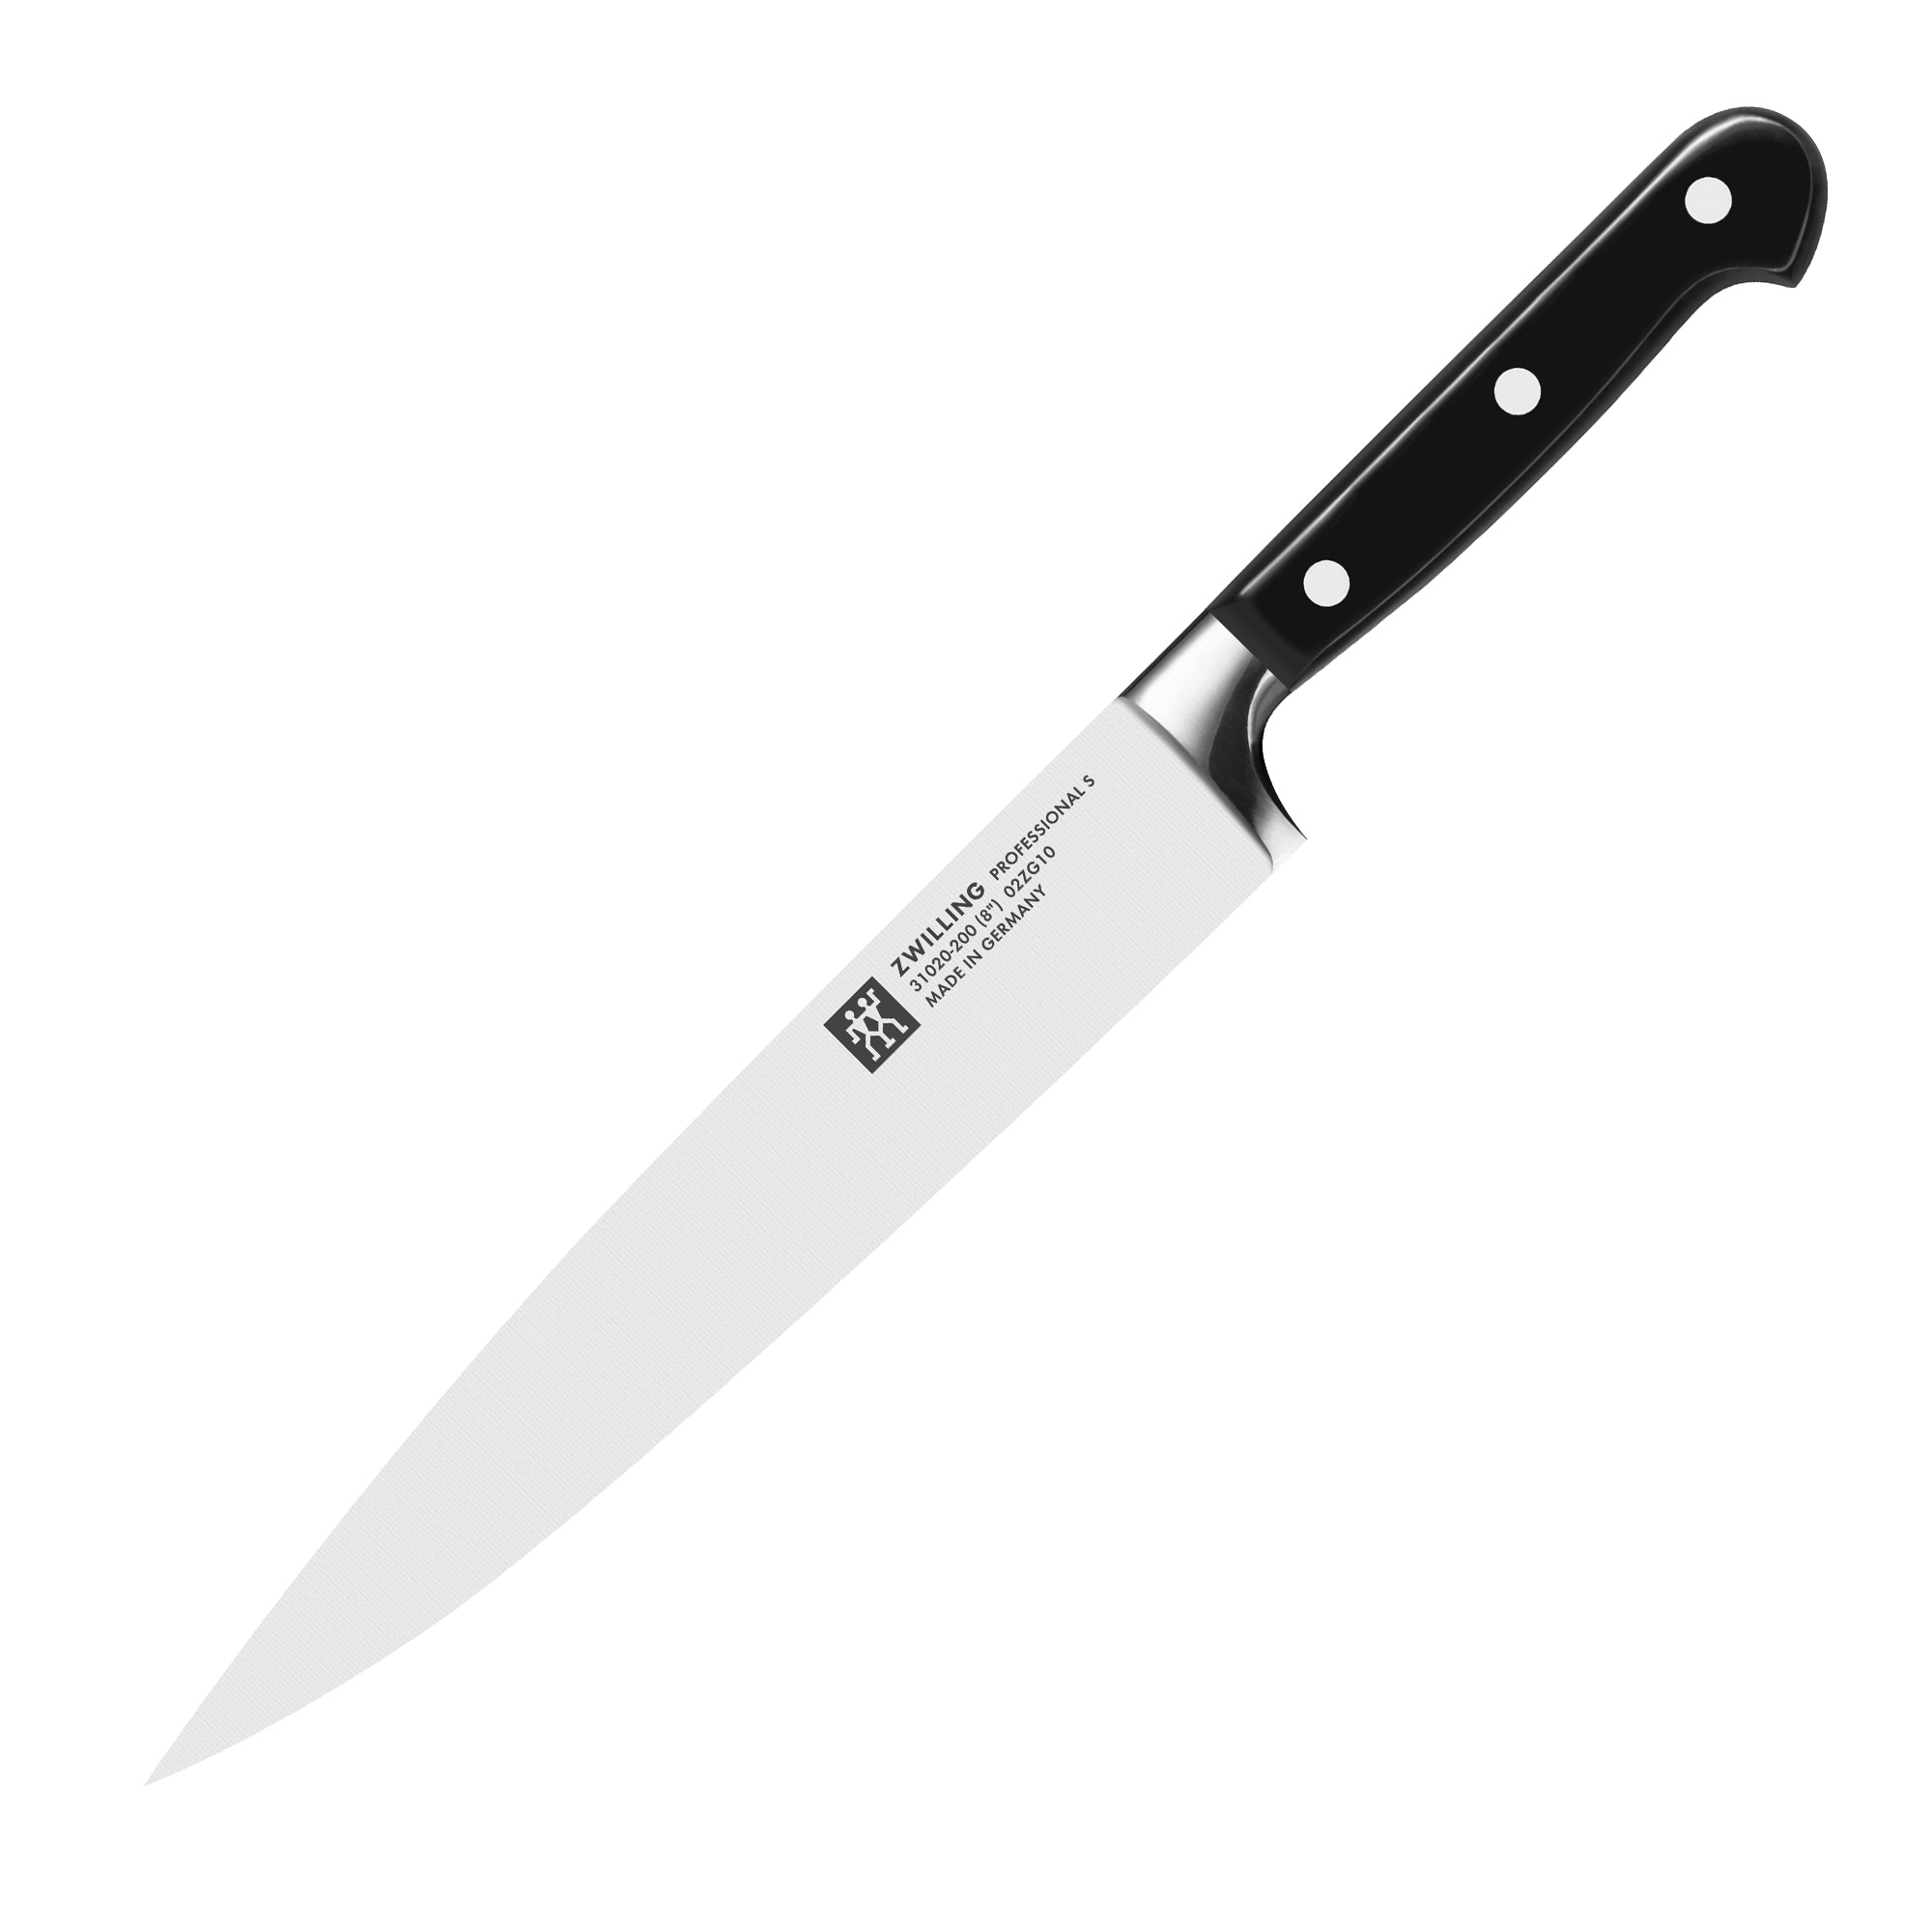 Zwilling - Professional S - Chef's knife  - 20 cm